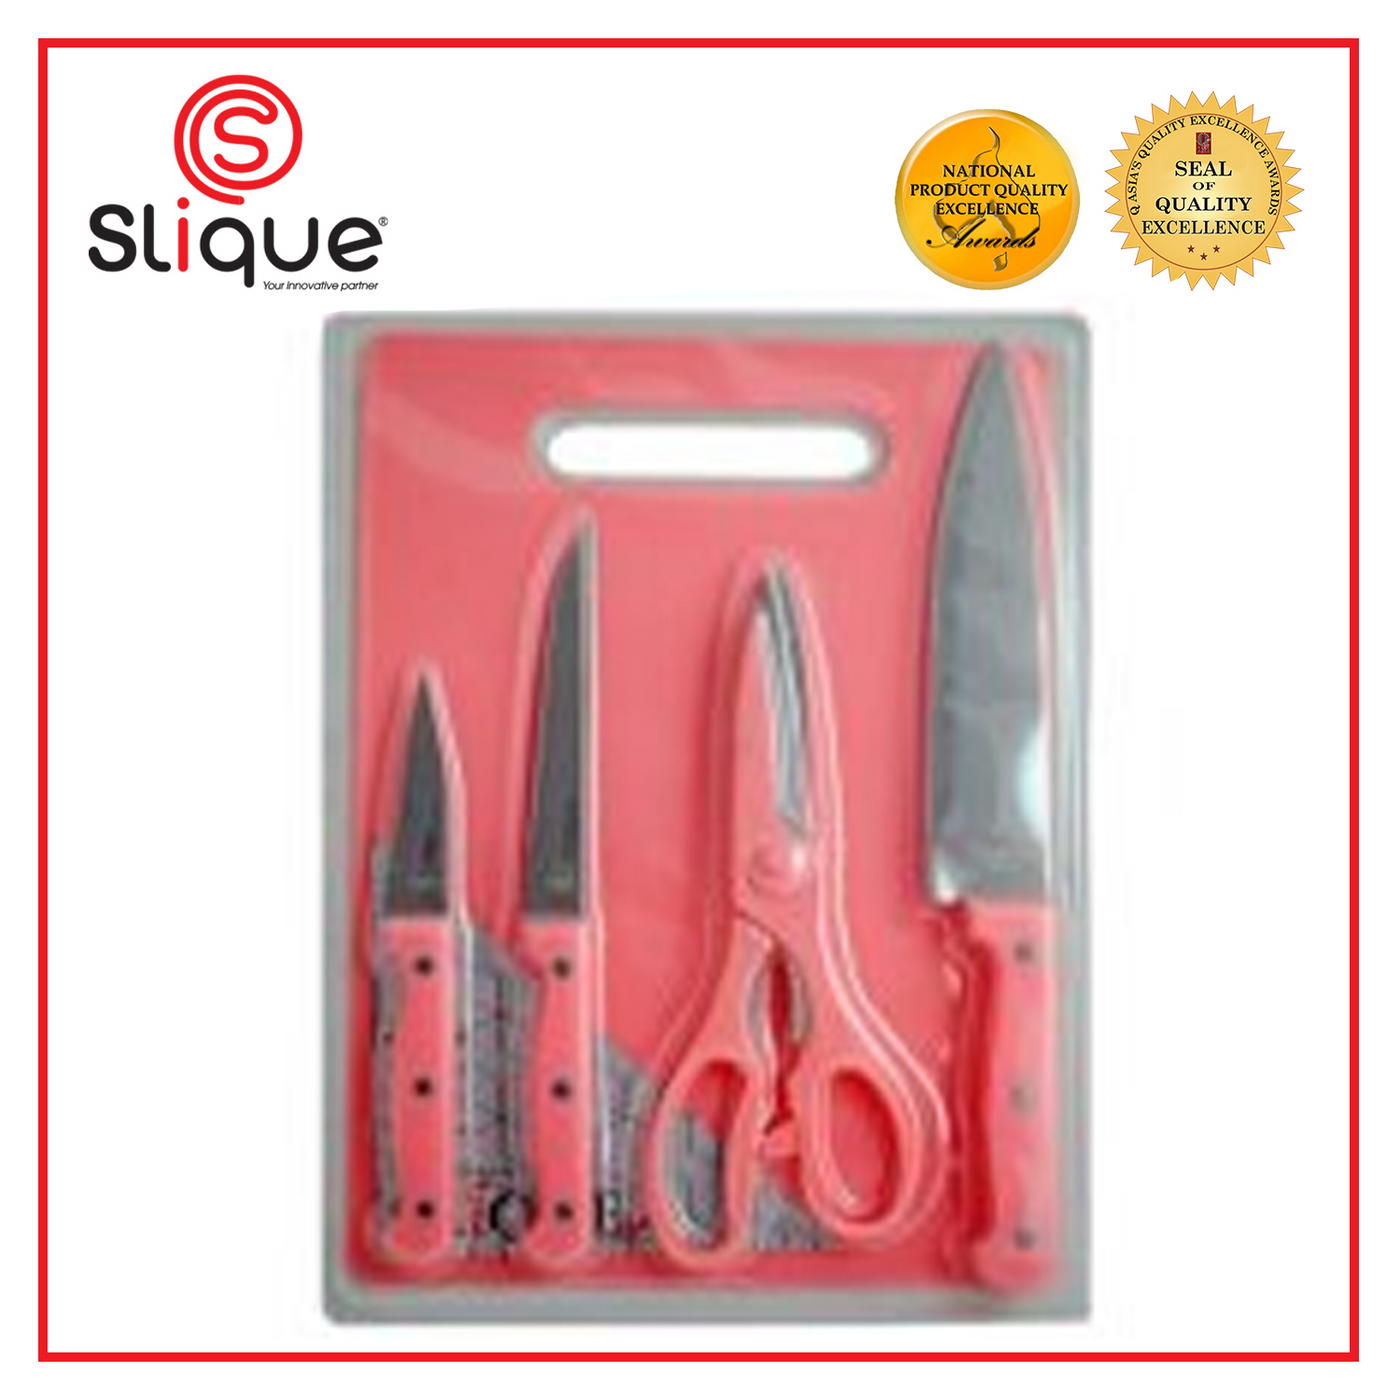 SLIQUE Premium Stainless Steel Kitchen Knife w/ Scissors Cutting Board Set of 5 Amazing Gift Idea For Any Occasion!